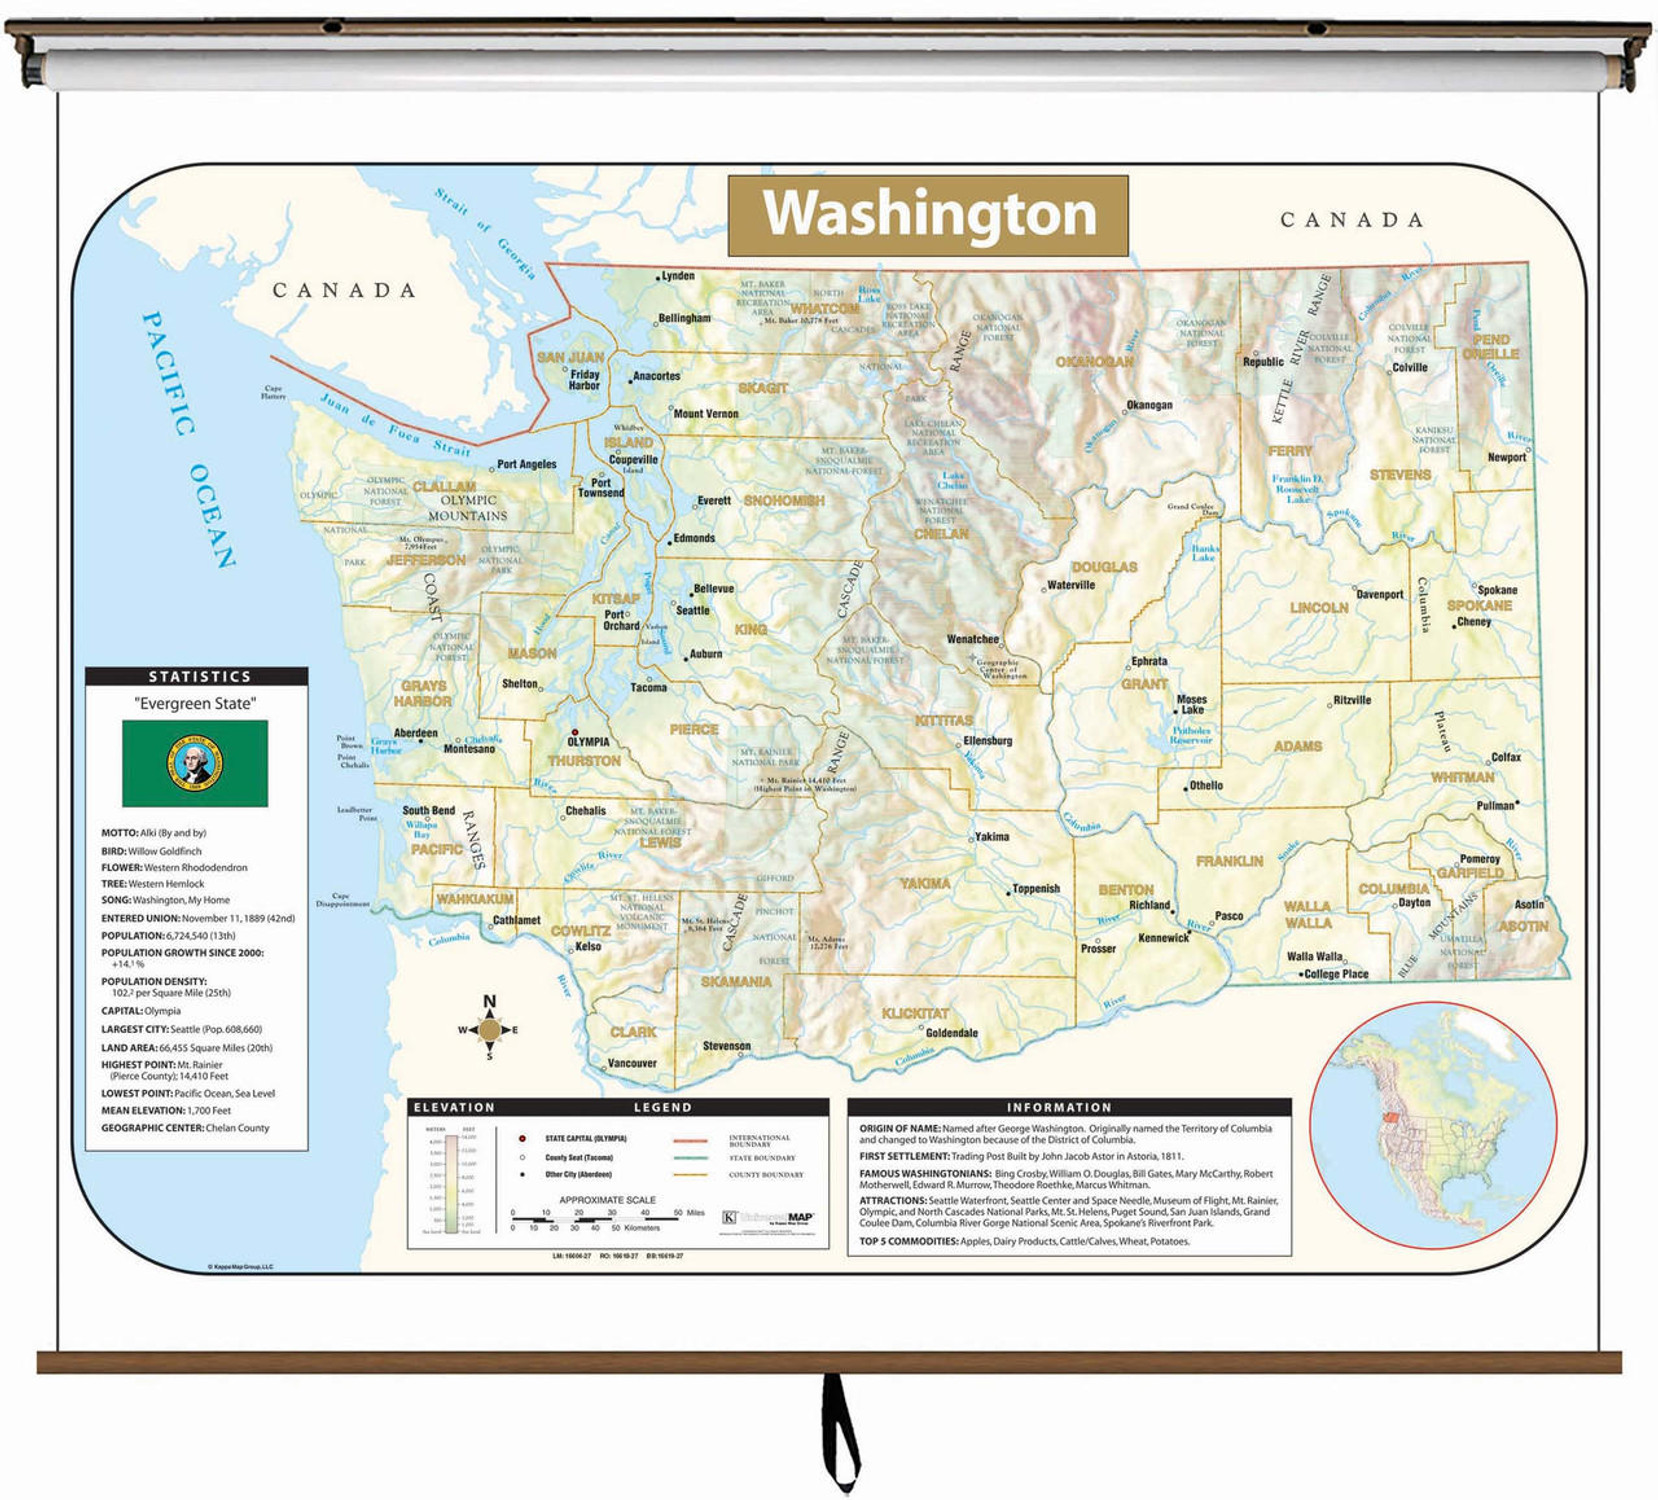 Washington State Large Shaded Relief Map on Spring Roller from Kappa Maps, image 1, World Maps Online